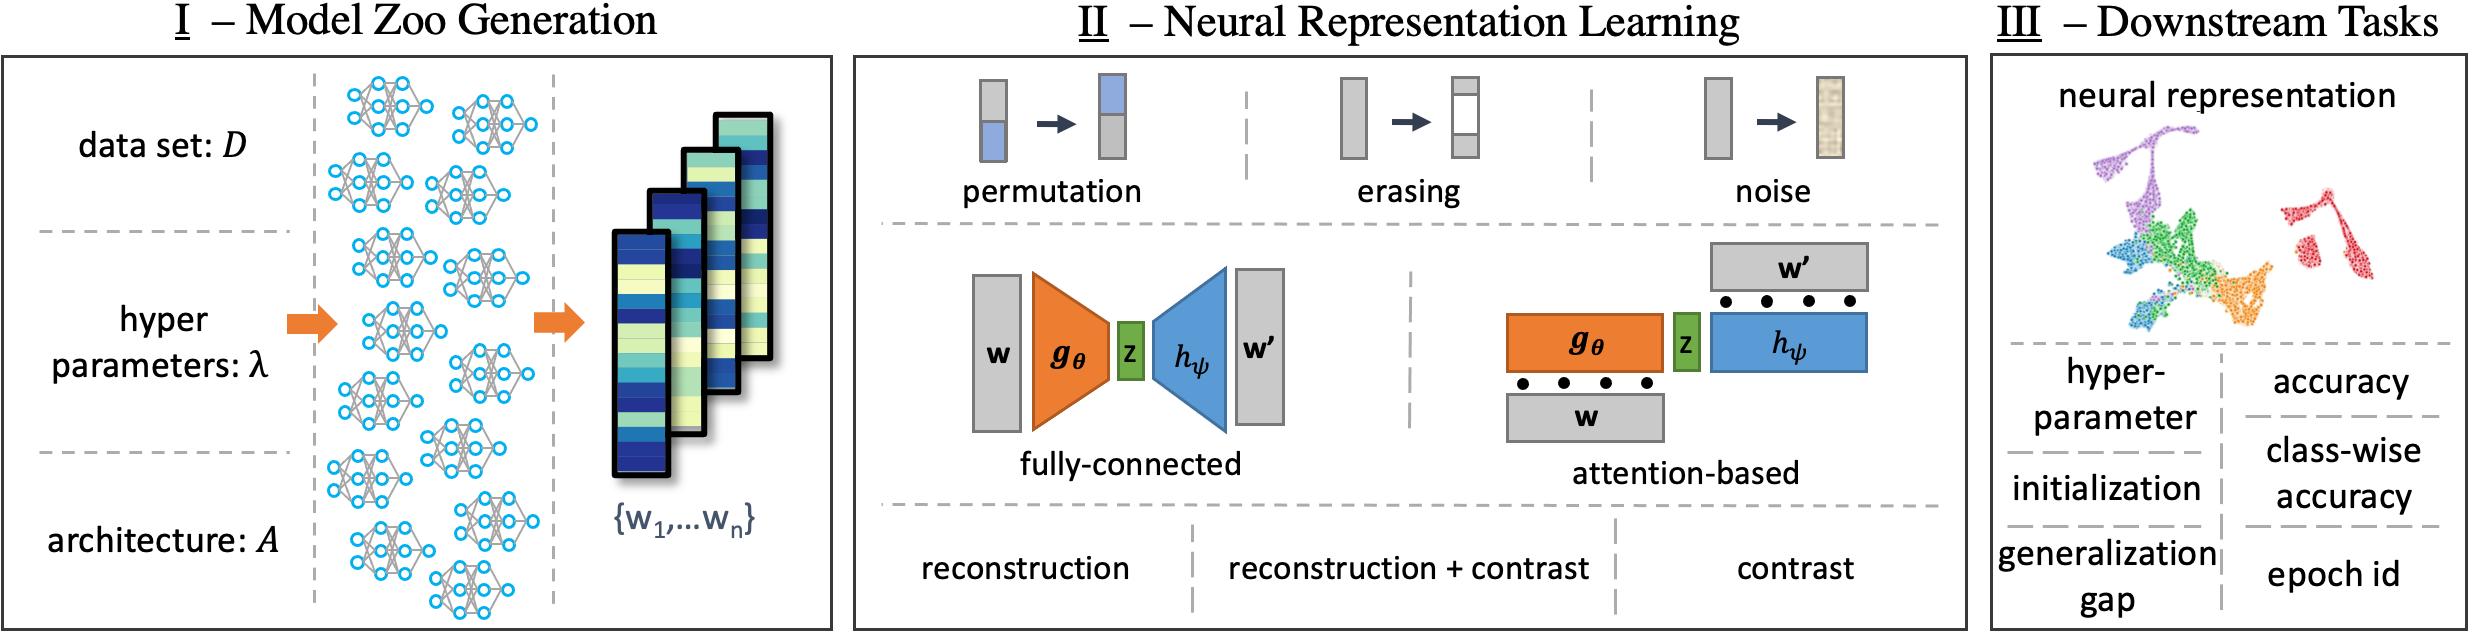 An overview of the proposed self-supervised representation learning approach. I. Populations of trained NNs form model zoos; each model is transformed in a vectorized form of its weights. II. Neural representations are learned from the model zoos using different augmentations, architectures, and Self-Supervised Learning tasks. III. Neural representations are evaluated on downstream tasks which predict model characteristics.
